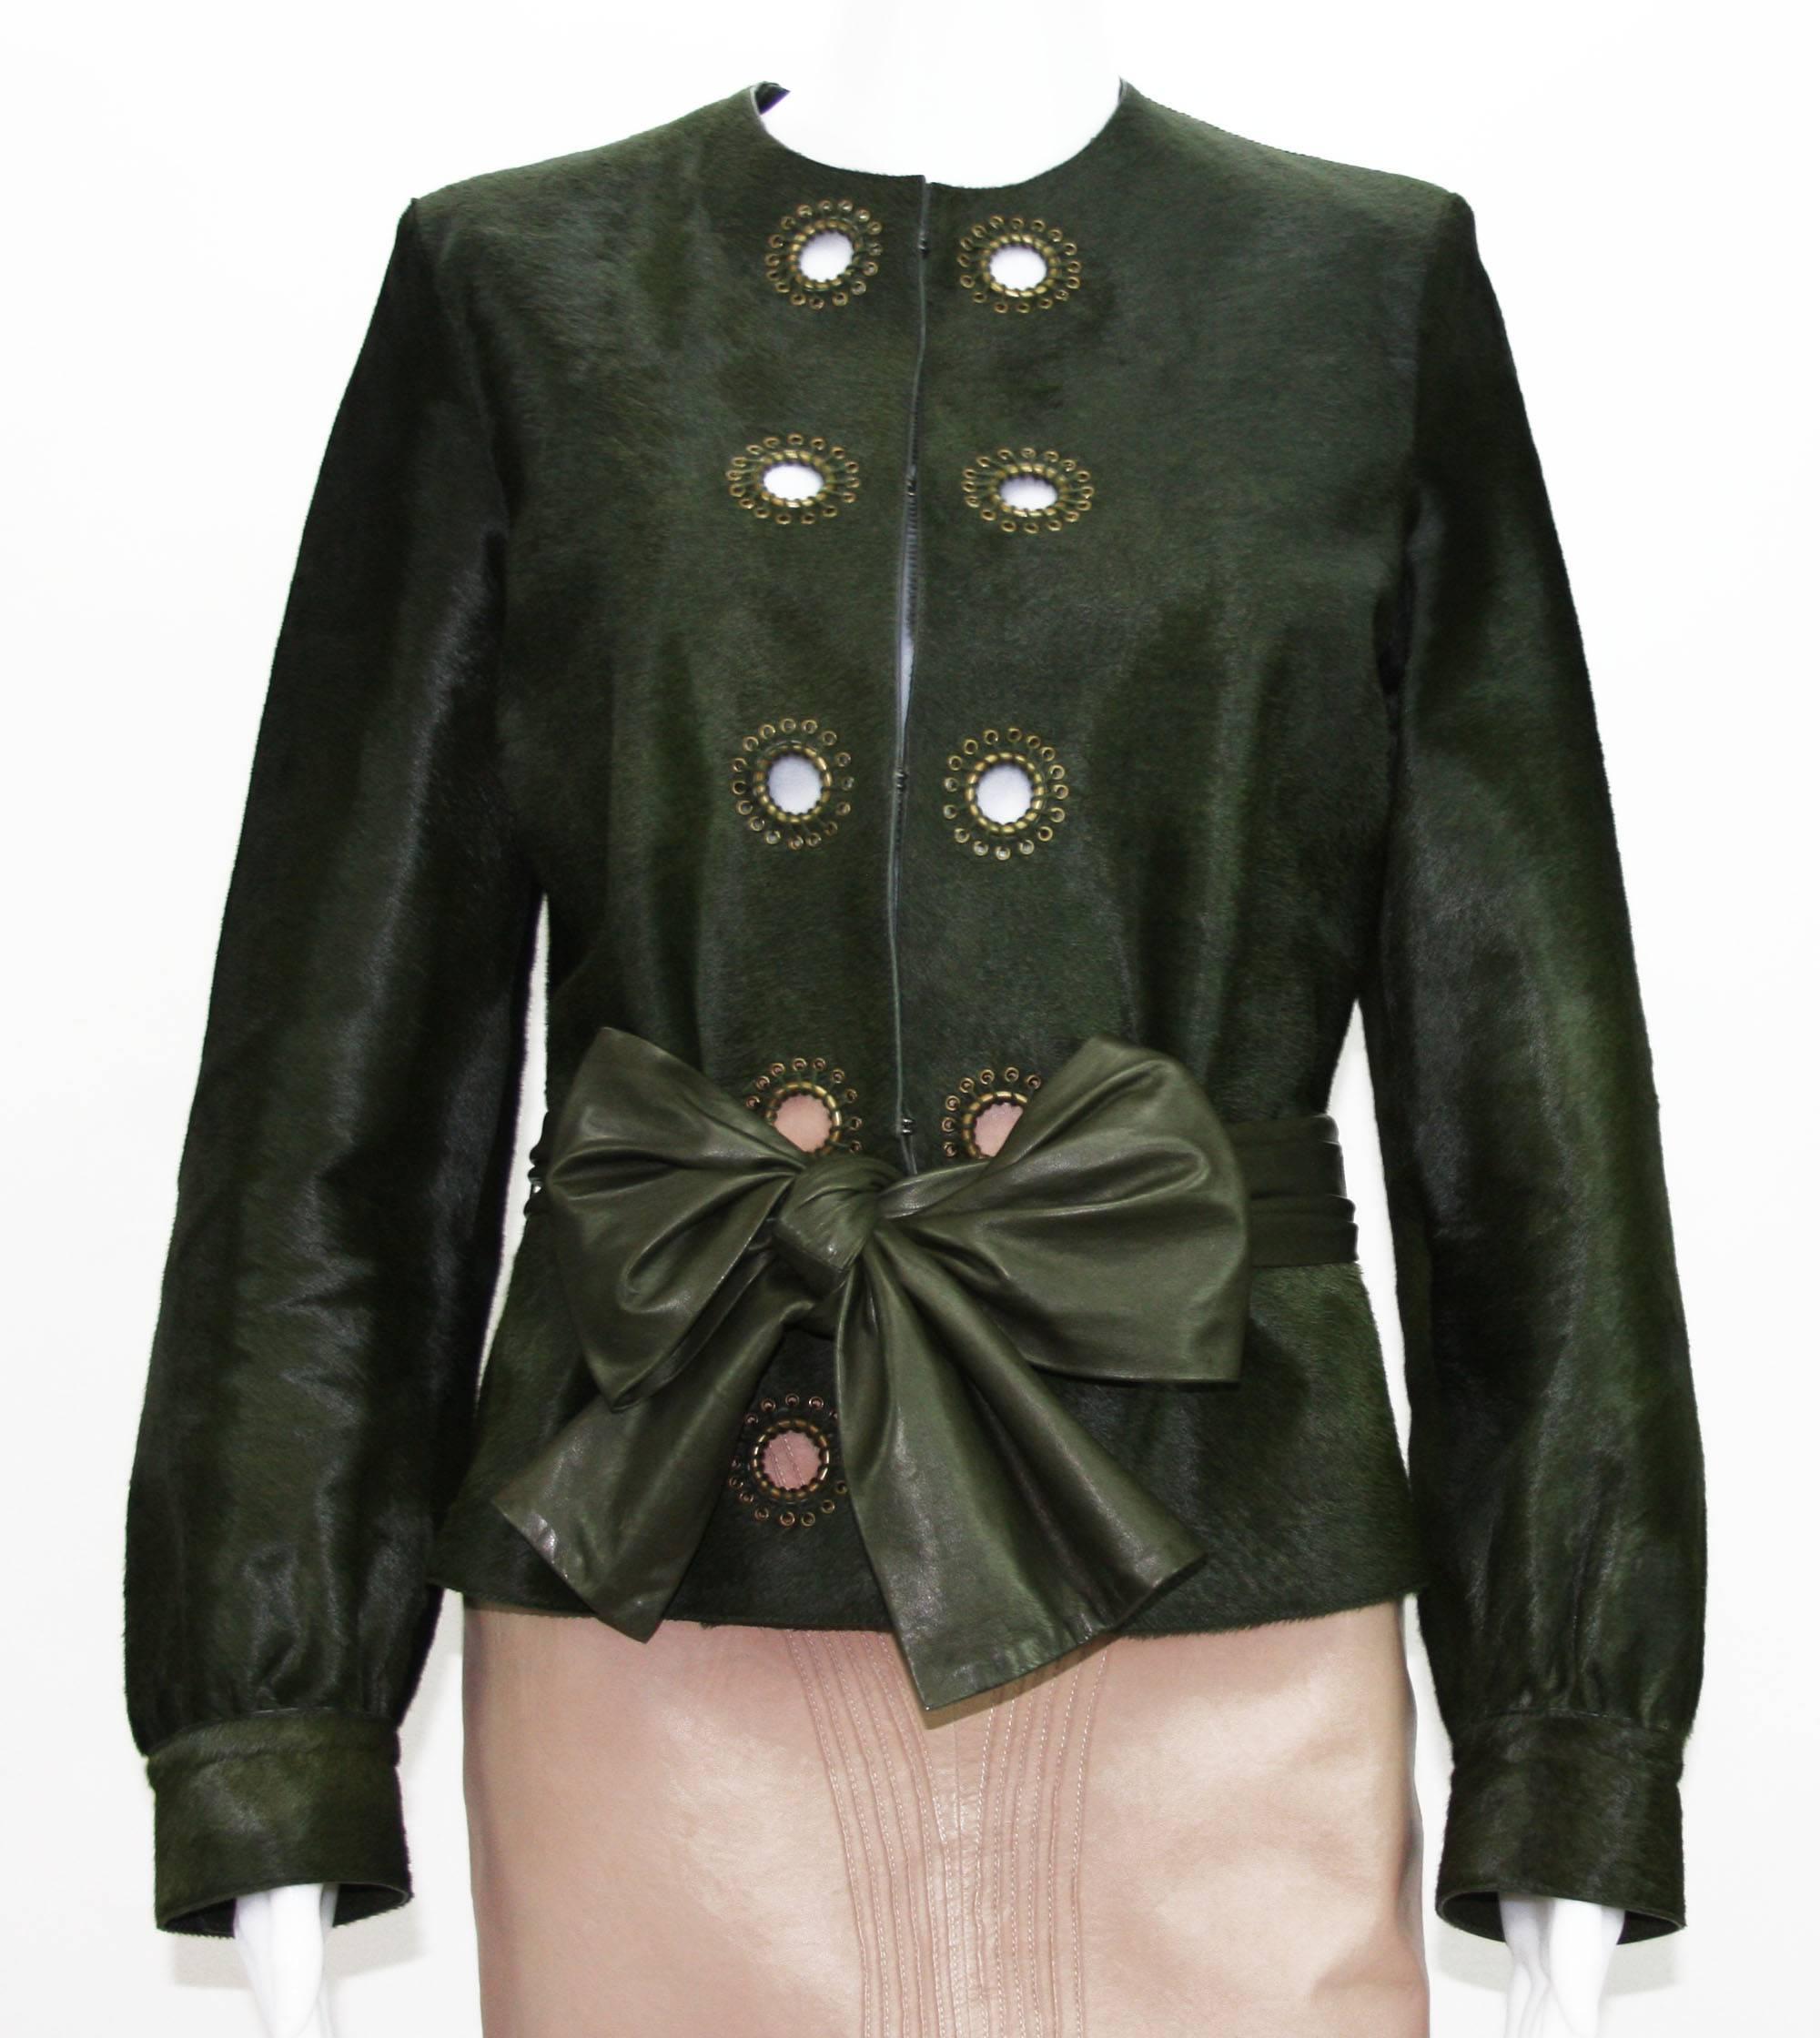 Yves Saint Laurent Leather Jacket.
Fr. size 44
100% Calf Hair, Color - Green, Brass-Tone Eyelet Accents Around.
Hook Closures, Sash Tie Leather Belt.
Measurements: Length - 24 inches, Sleeve - 24.5 inches, Bust - up to 41 inches.
Made in Italy.
New